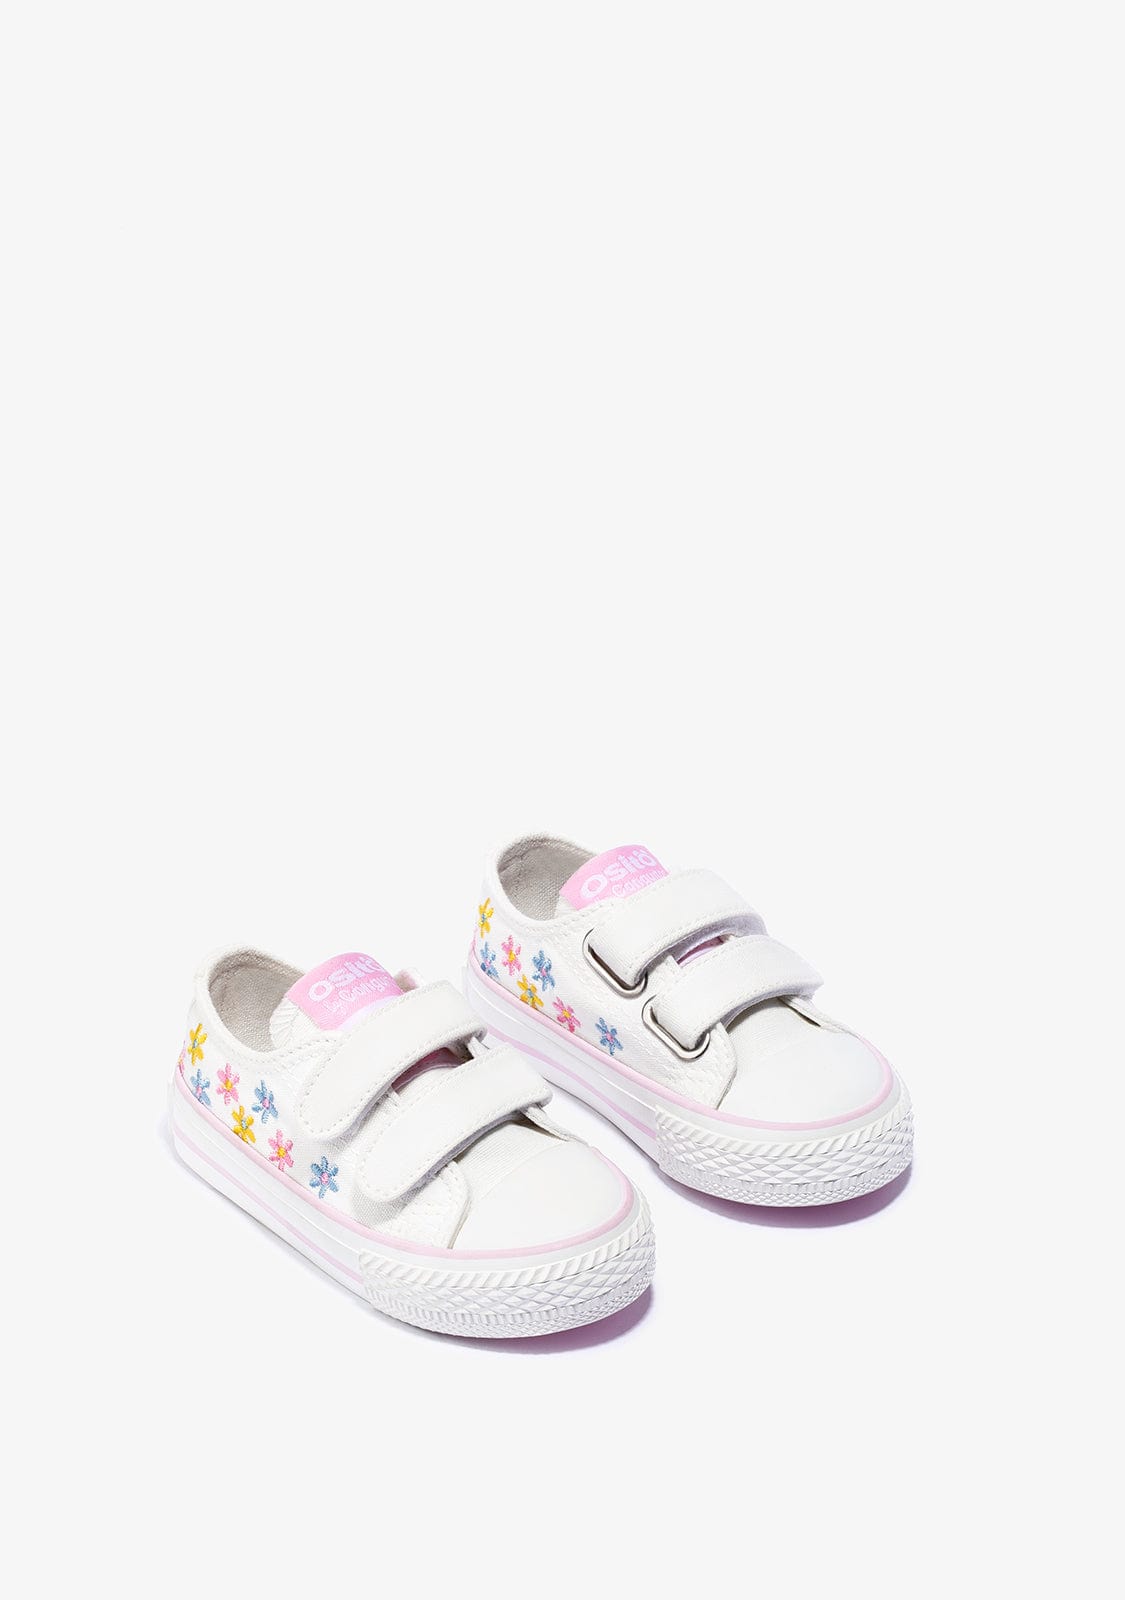 OSITO Shoes Baby's White Flowers Sneakers Canvas